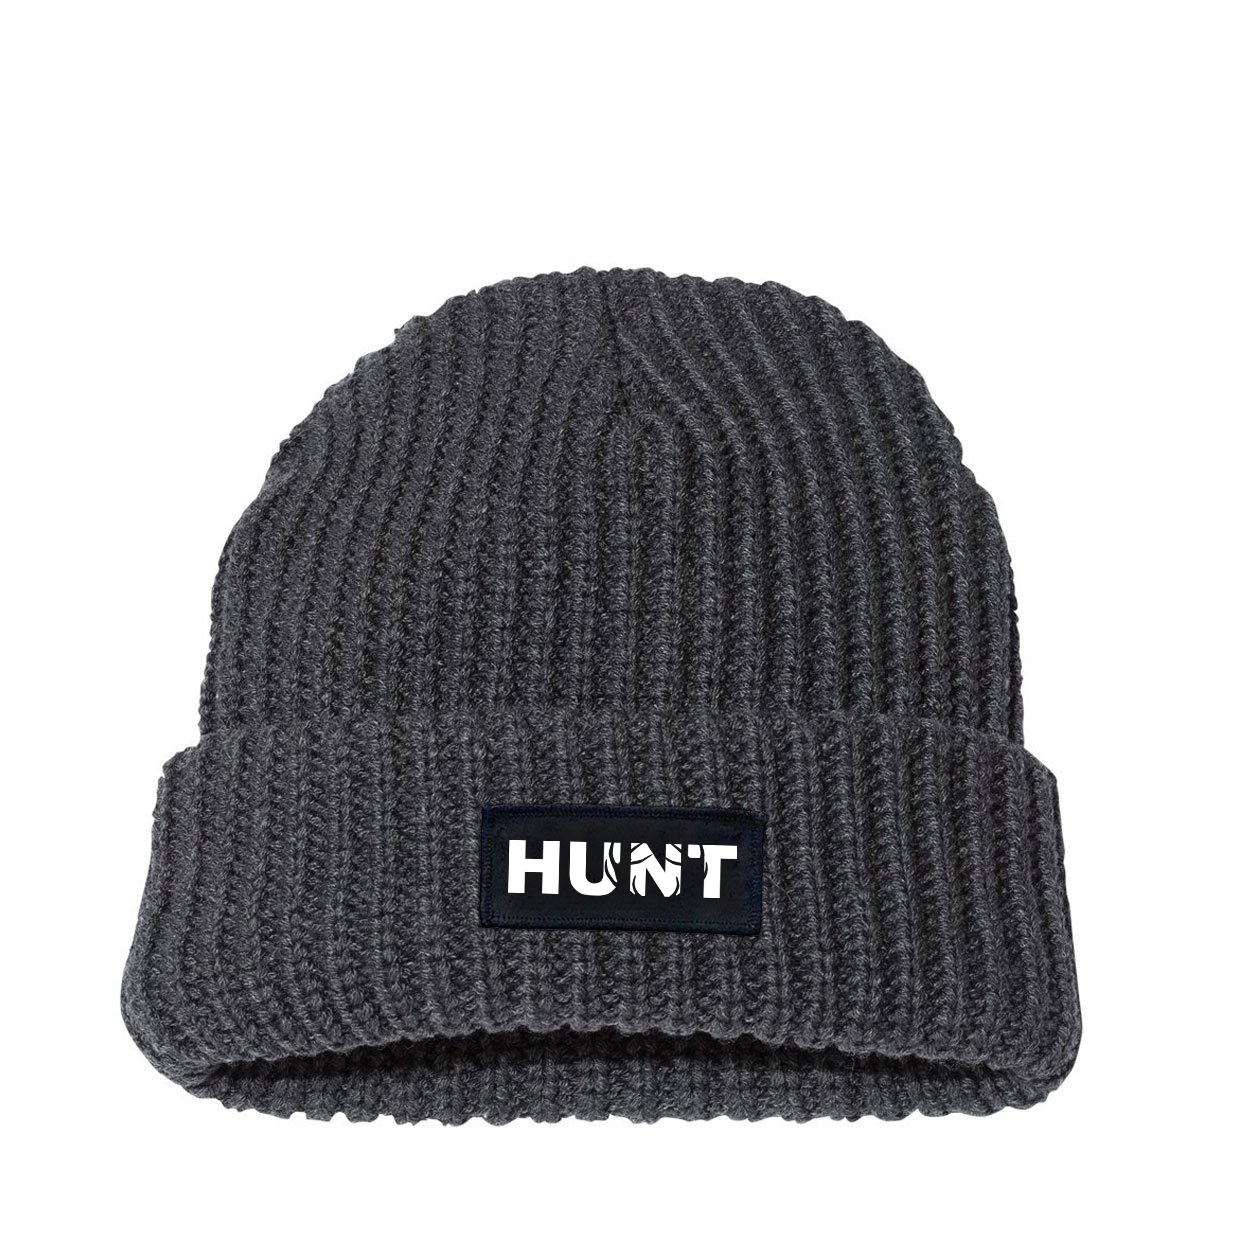 Hunt Rack Logo Night Out Woven Patch Roll Up Jumbo Chunky Knit Beanie Charcoal (White Logo)